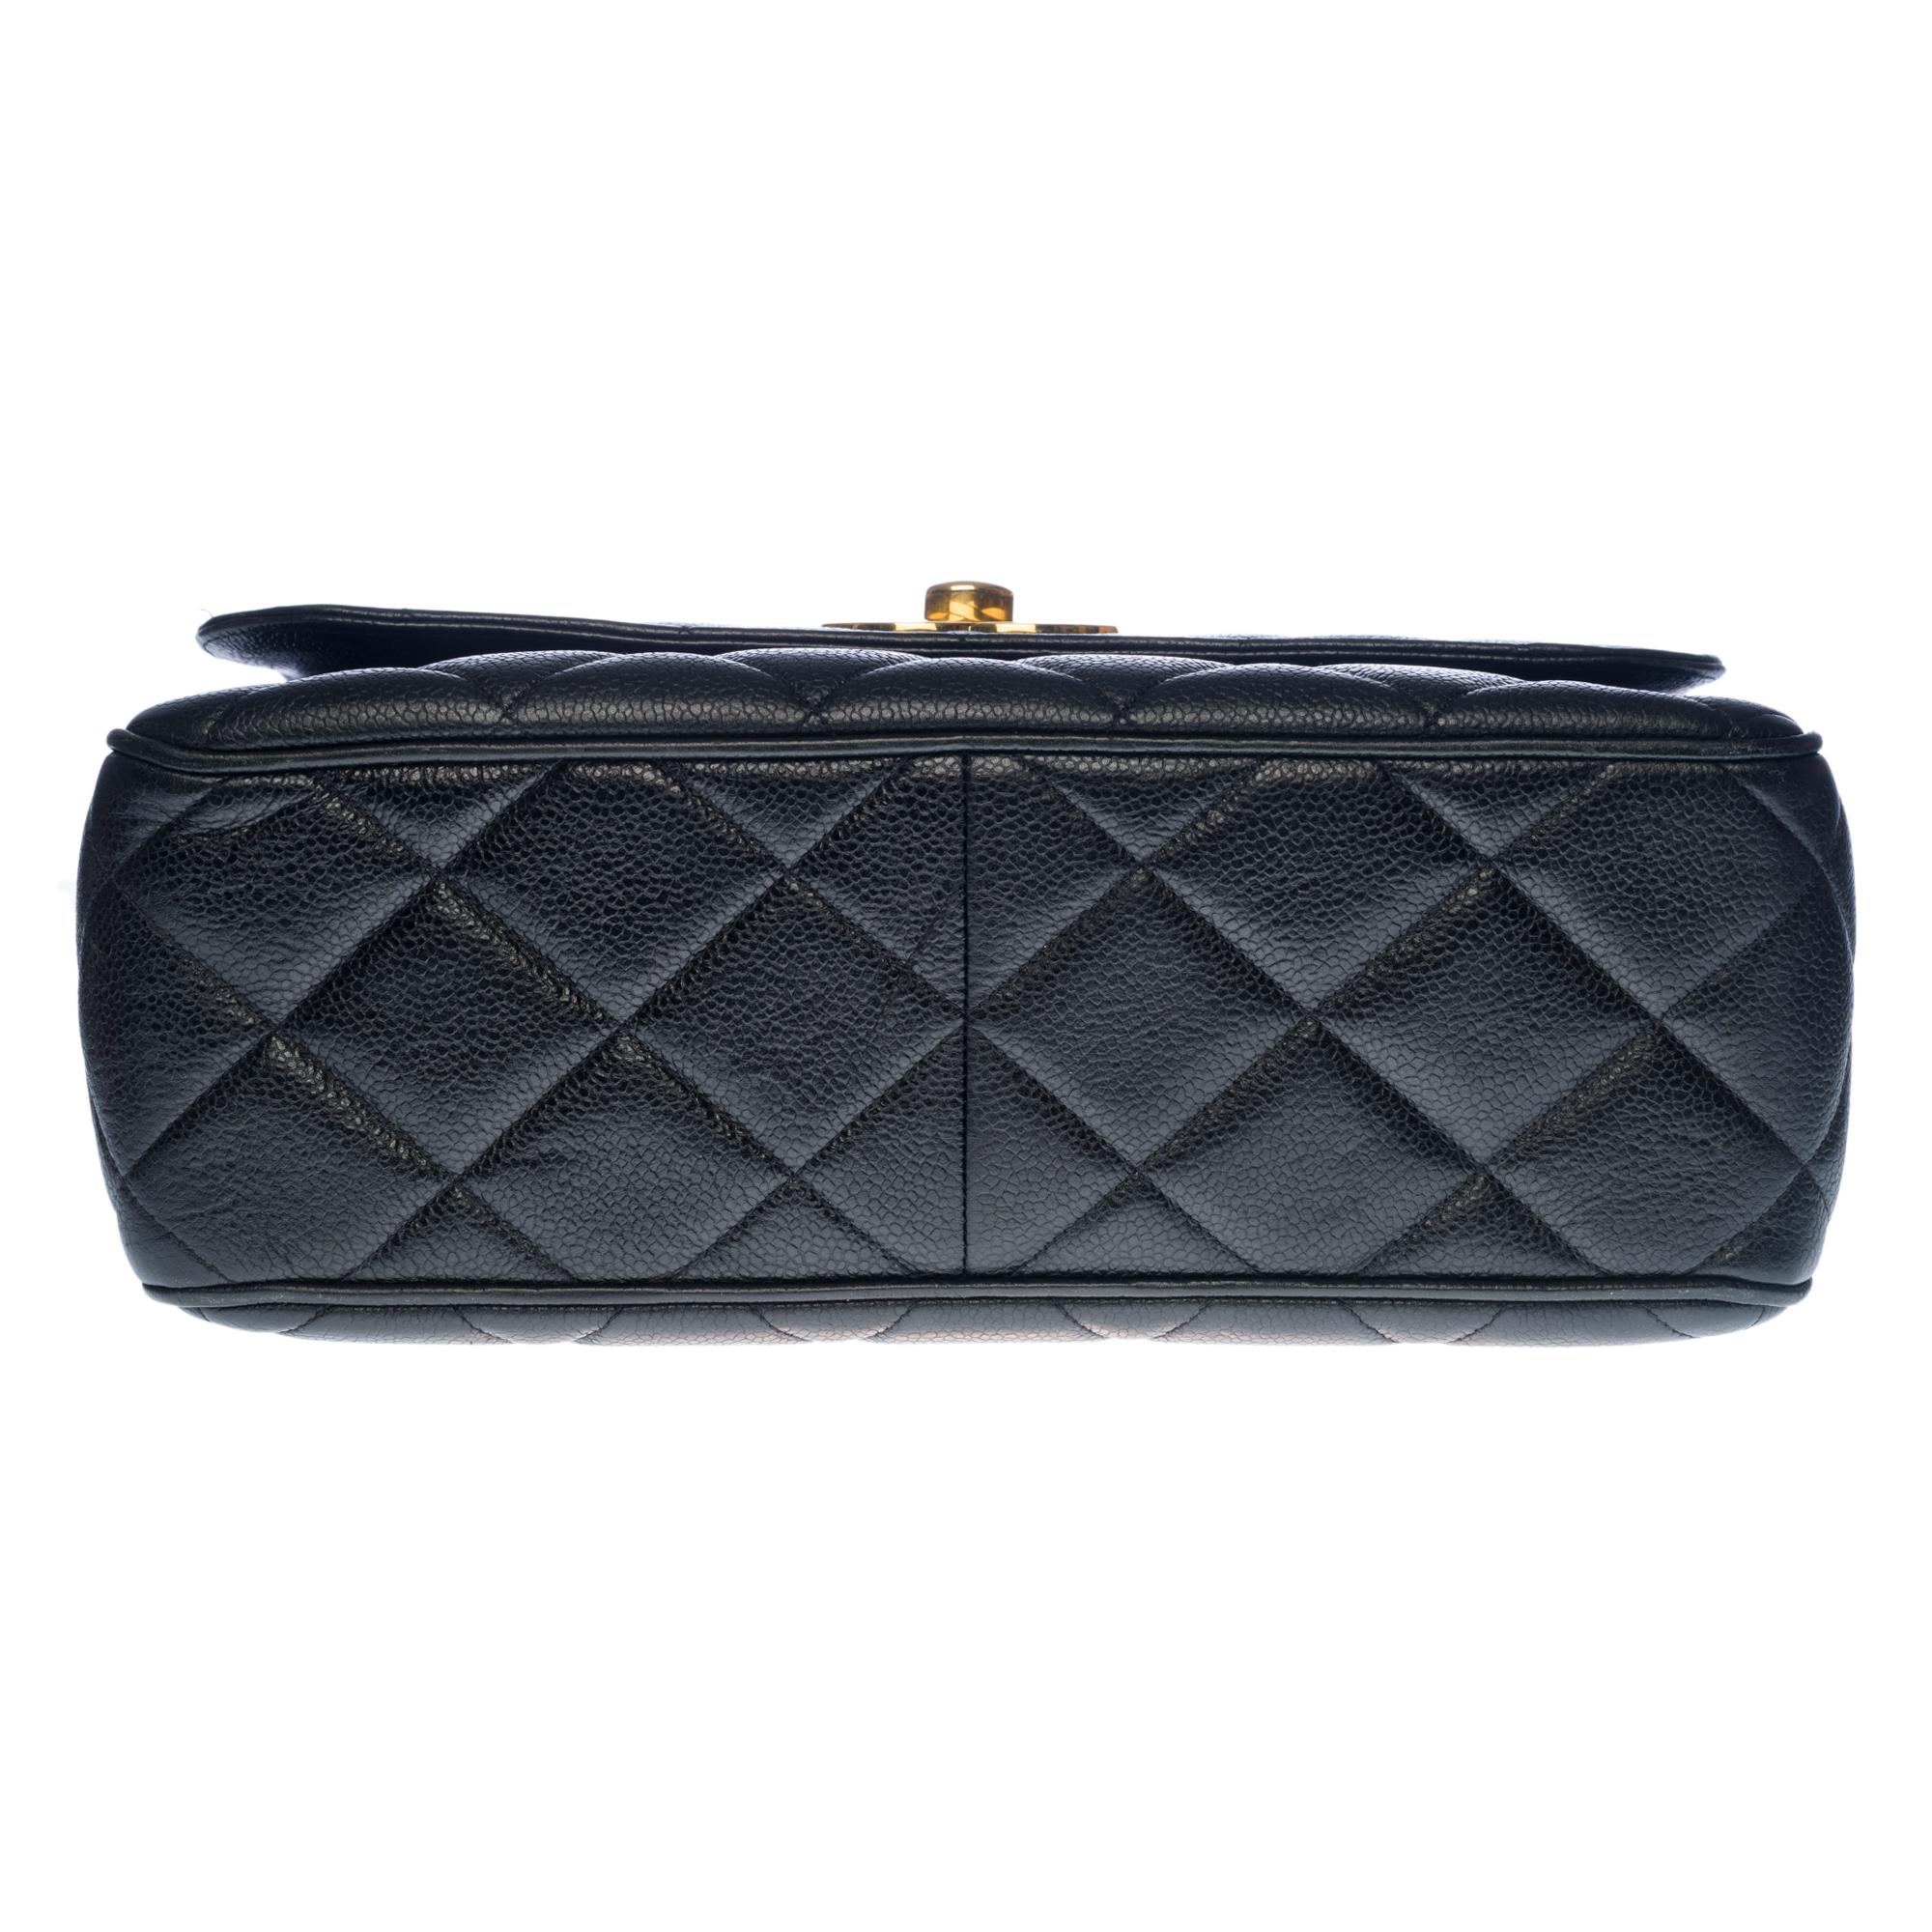 Rare Chanel Maxi shoulder flap bag in black caviar quilted leather, GHW 4